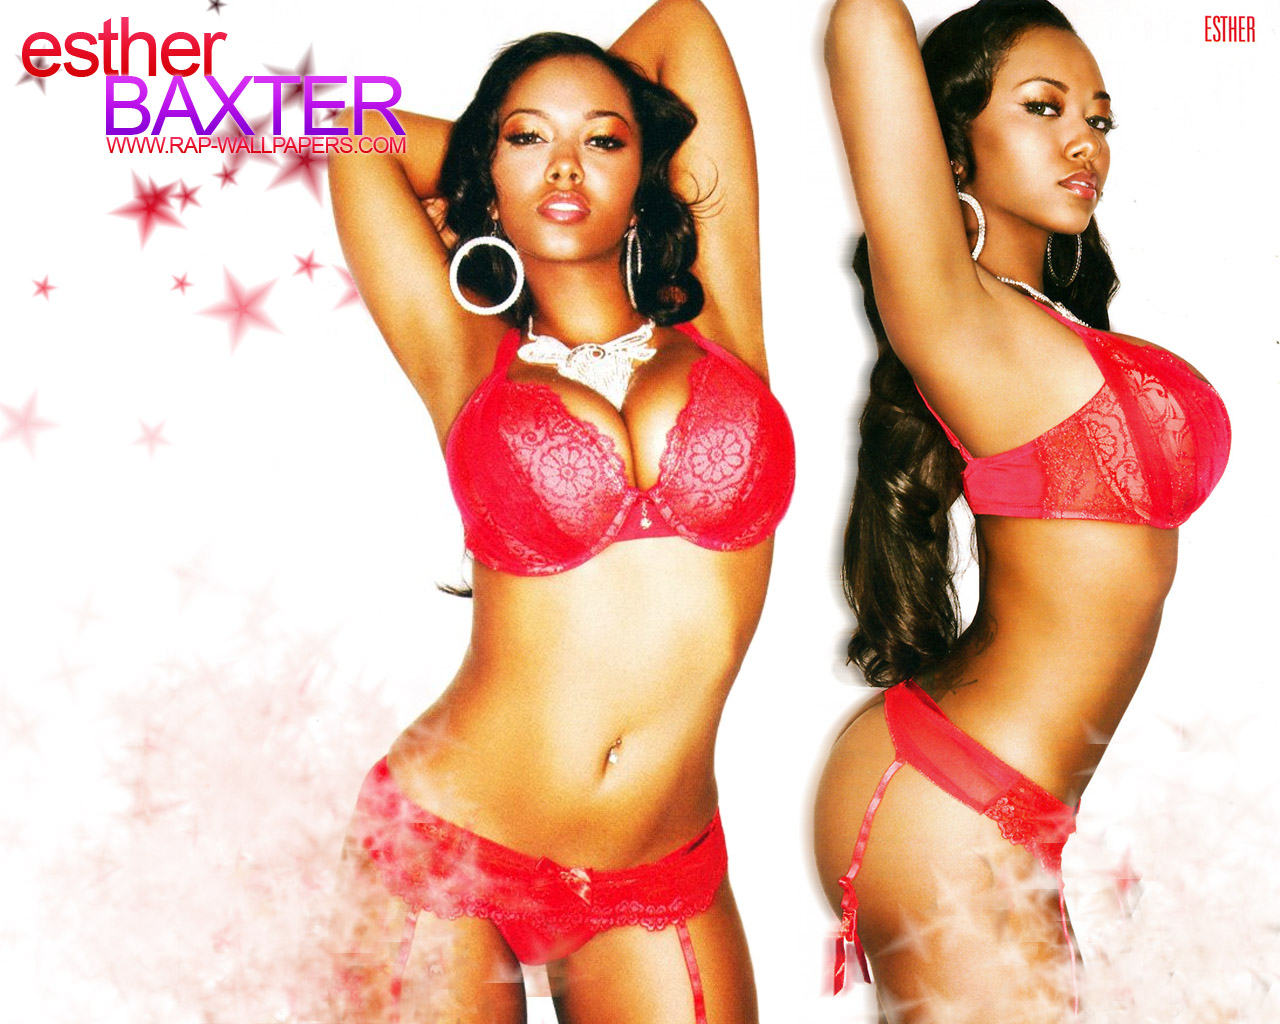  click on the wallpaper and choose 'Save Picture As' Esther Baxter 2